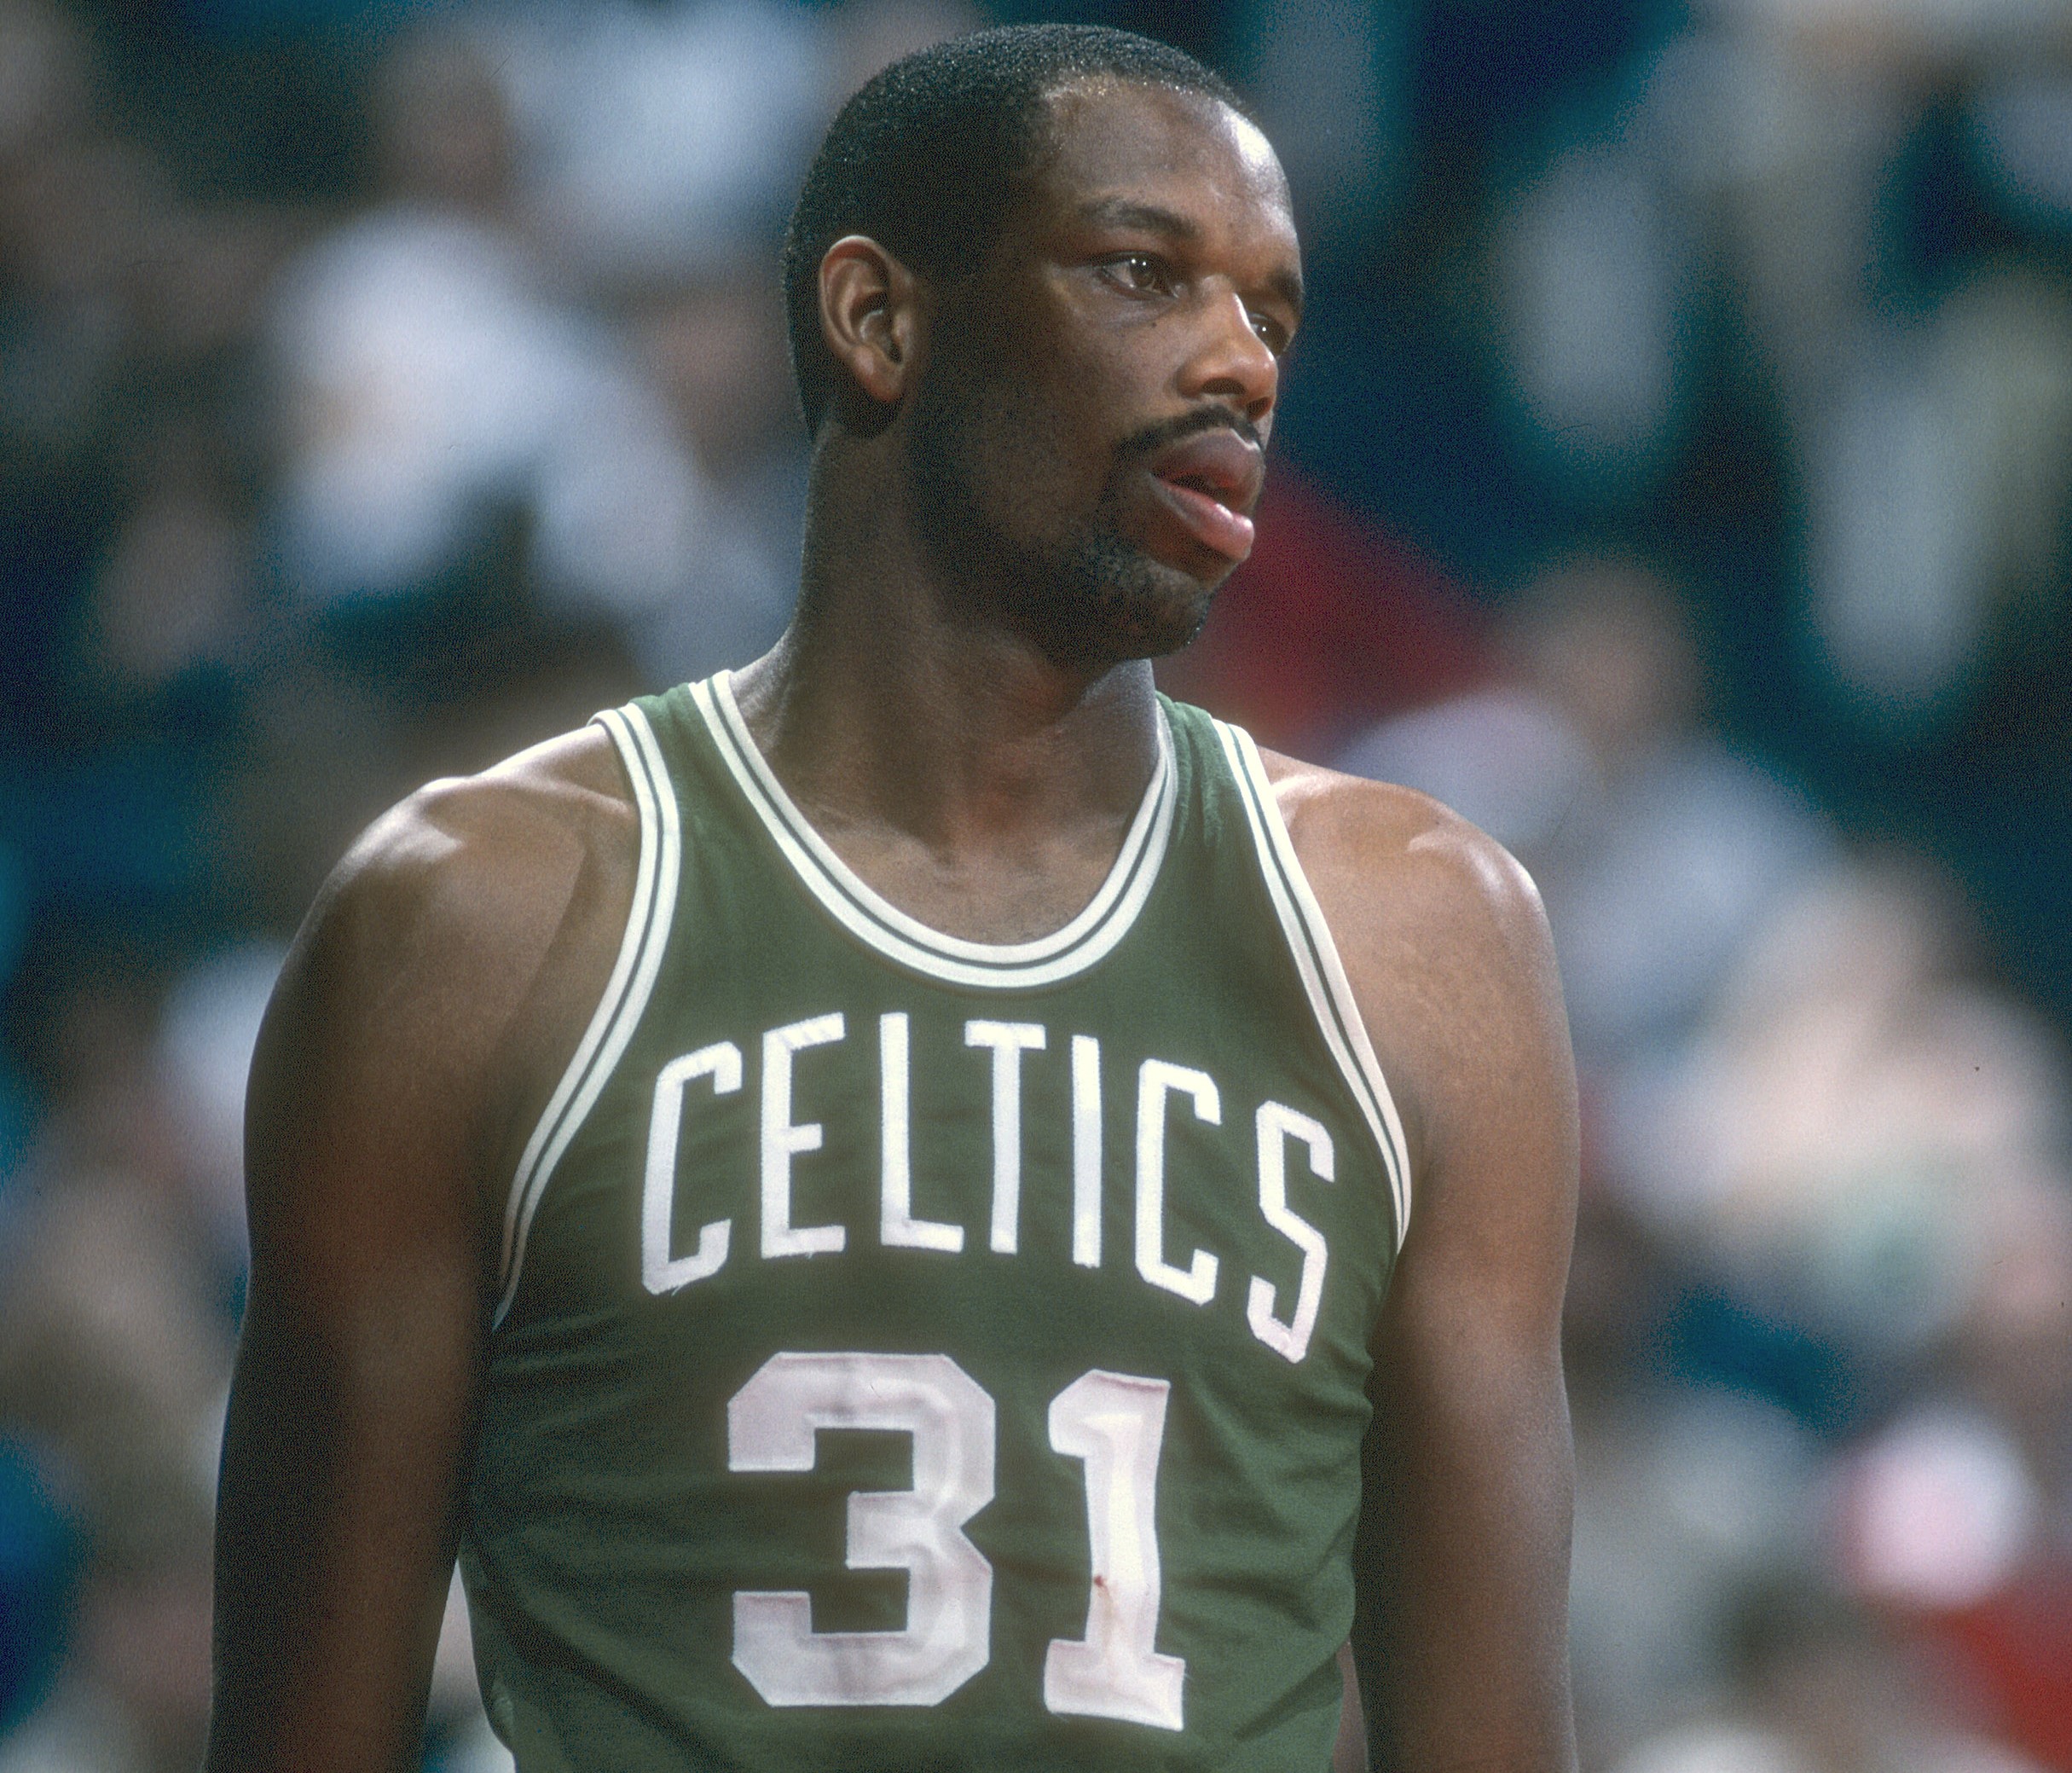 Cedric Maxwell of the Boston Celtics looks on during a break in the action against the Washington Bullets.